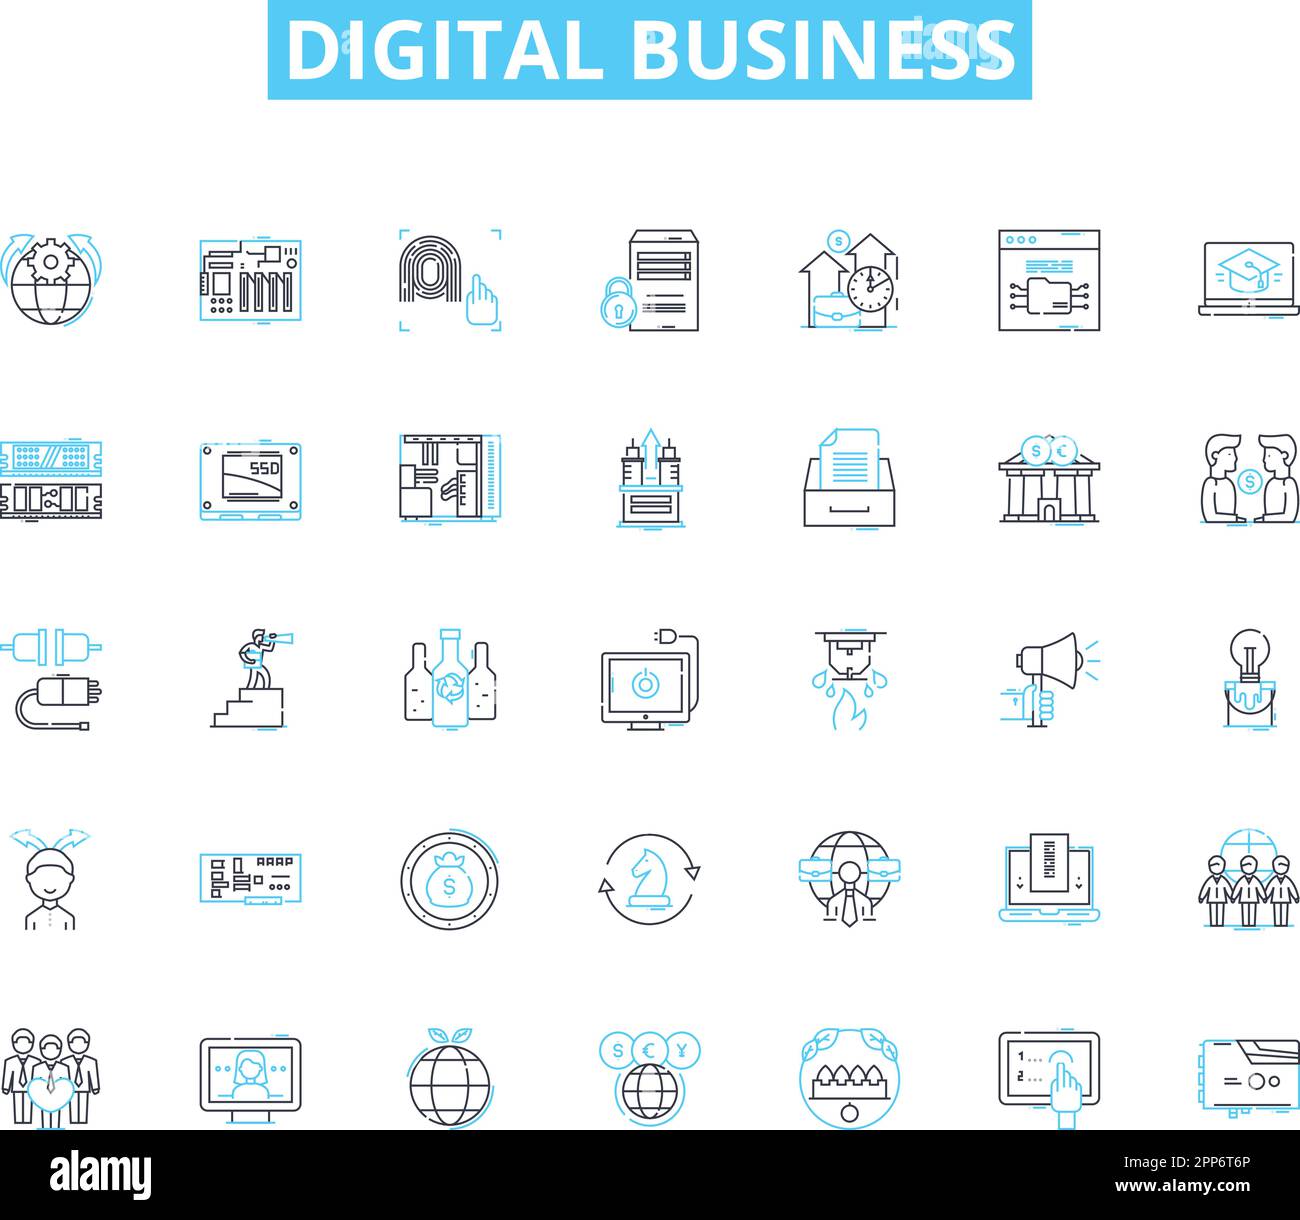 Digital business linear icons set. E-commerce, Innovation, Online, Marketing, Analytics, Cybersecurity, Platform line vector and concept signs. Social Stock Vector